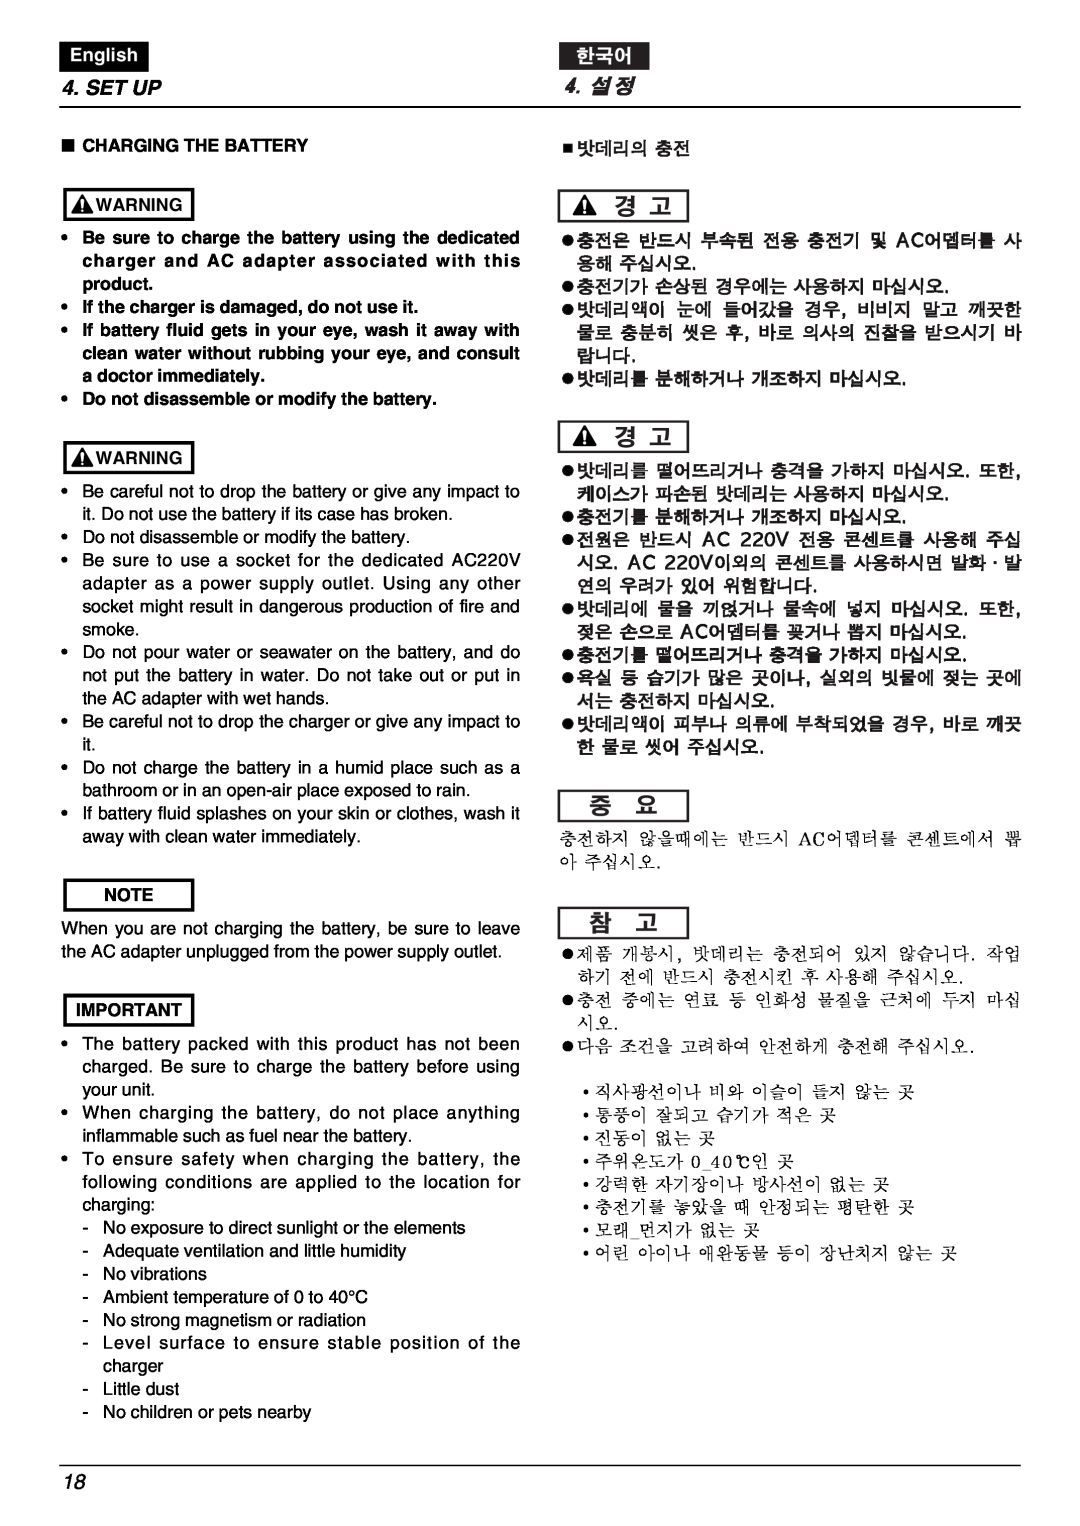 Zenoah BK2650DL-Hb owner manual Set Up, English, Charging The Battery, 밧데리의 충전, If the charger is damaged, do not use it 